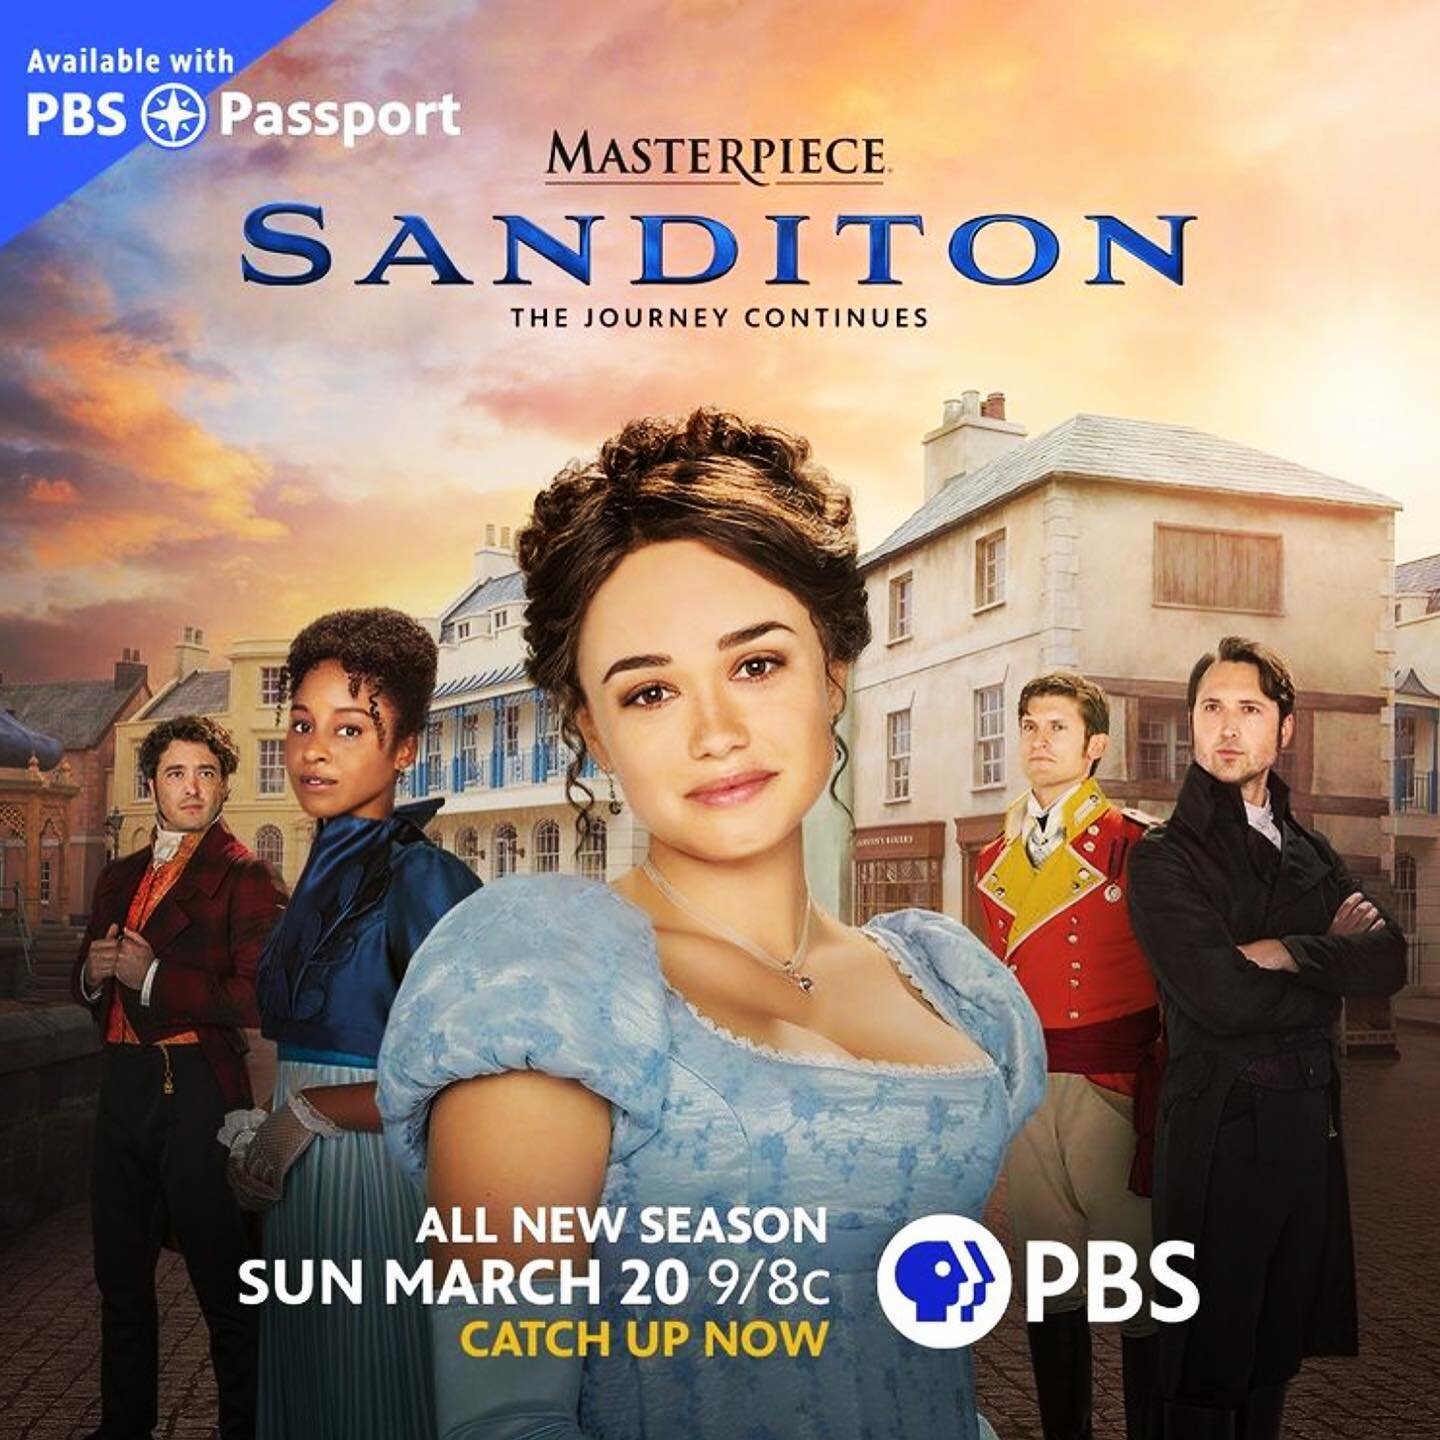 ❤️🎩🇬🇧SANDITON! SEASON 2 ~ A joy to provide the Audio Description Narration on this TV period-drama adaptation of Jane Austen's final novel, written only months before her death in 1817.

First two episodes premiere this Sunday, March 20 at 9 P.M./